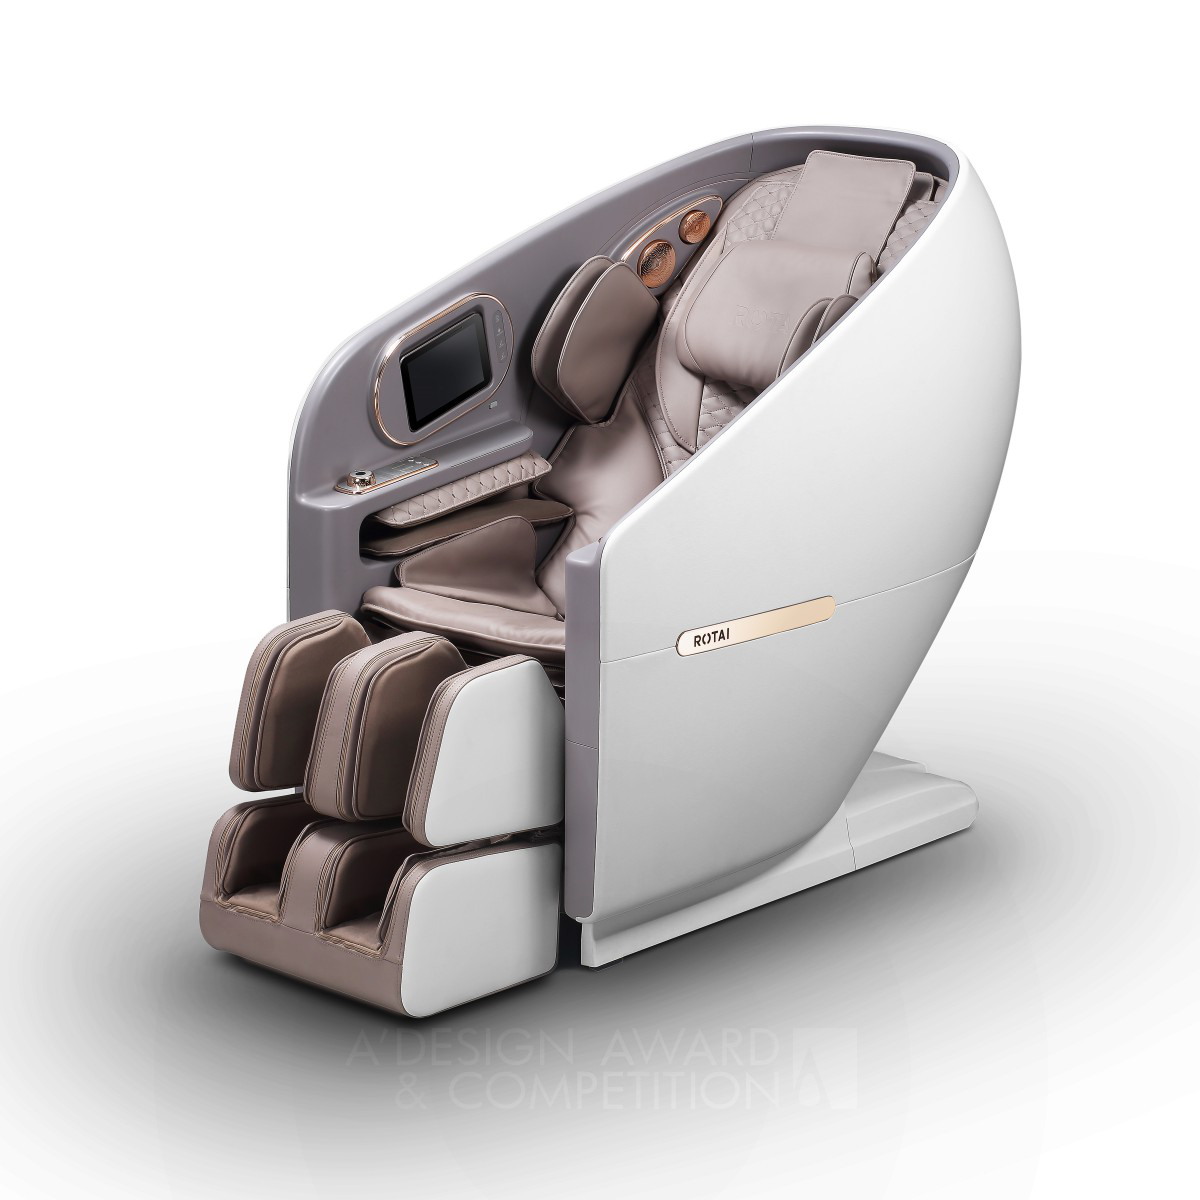 Shanghai Rongtai Health Tech. Corp. Ltd wins Silver at the prestigious A' Sporting Goods, Fitness and Recreation Equipment Design Award with S80 Massage Chair.